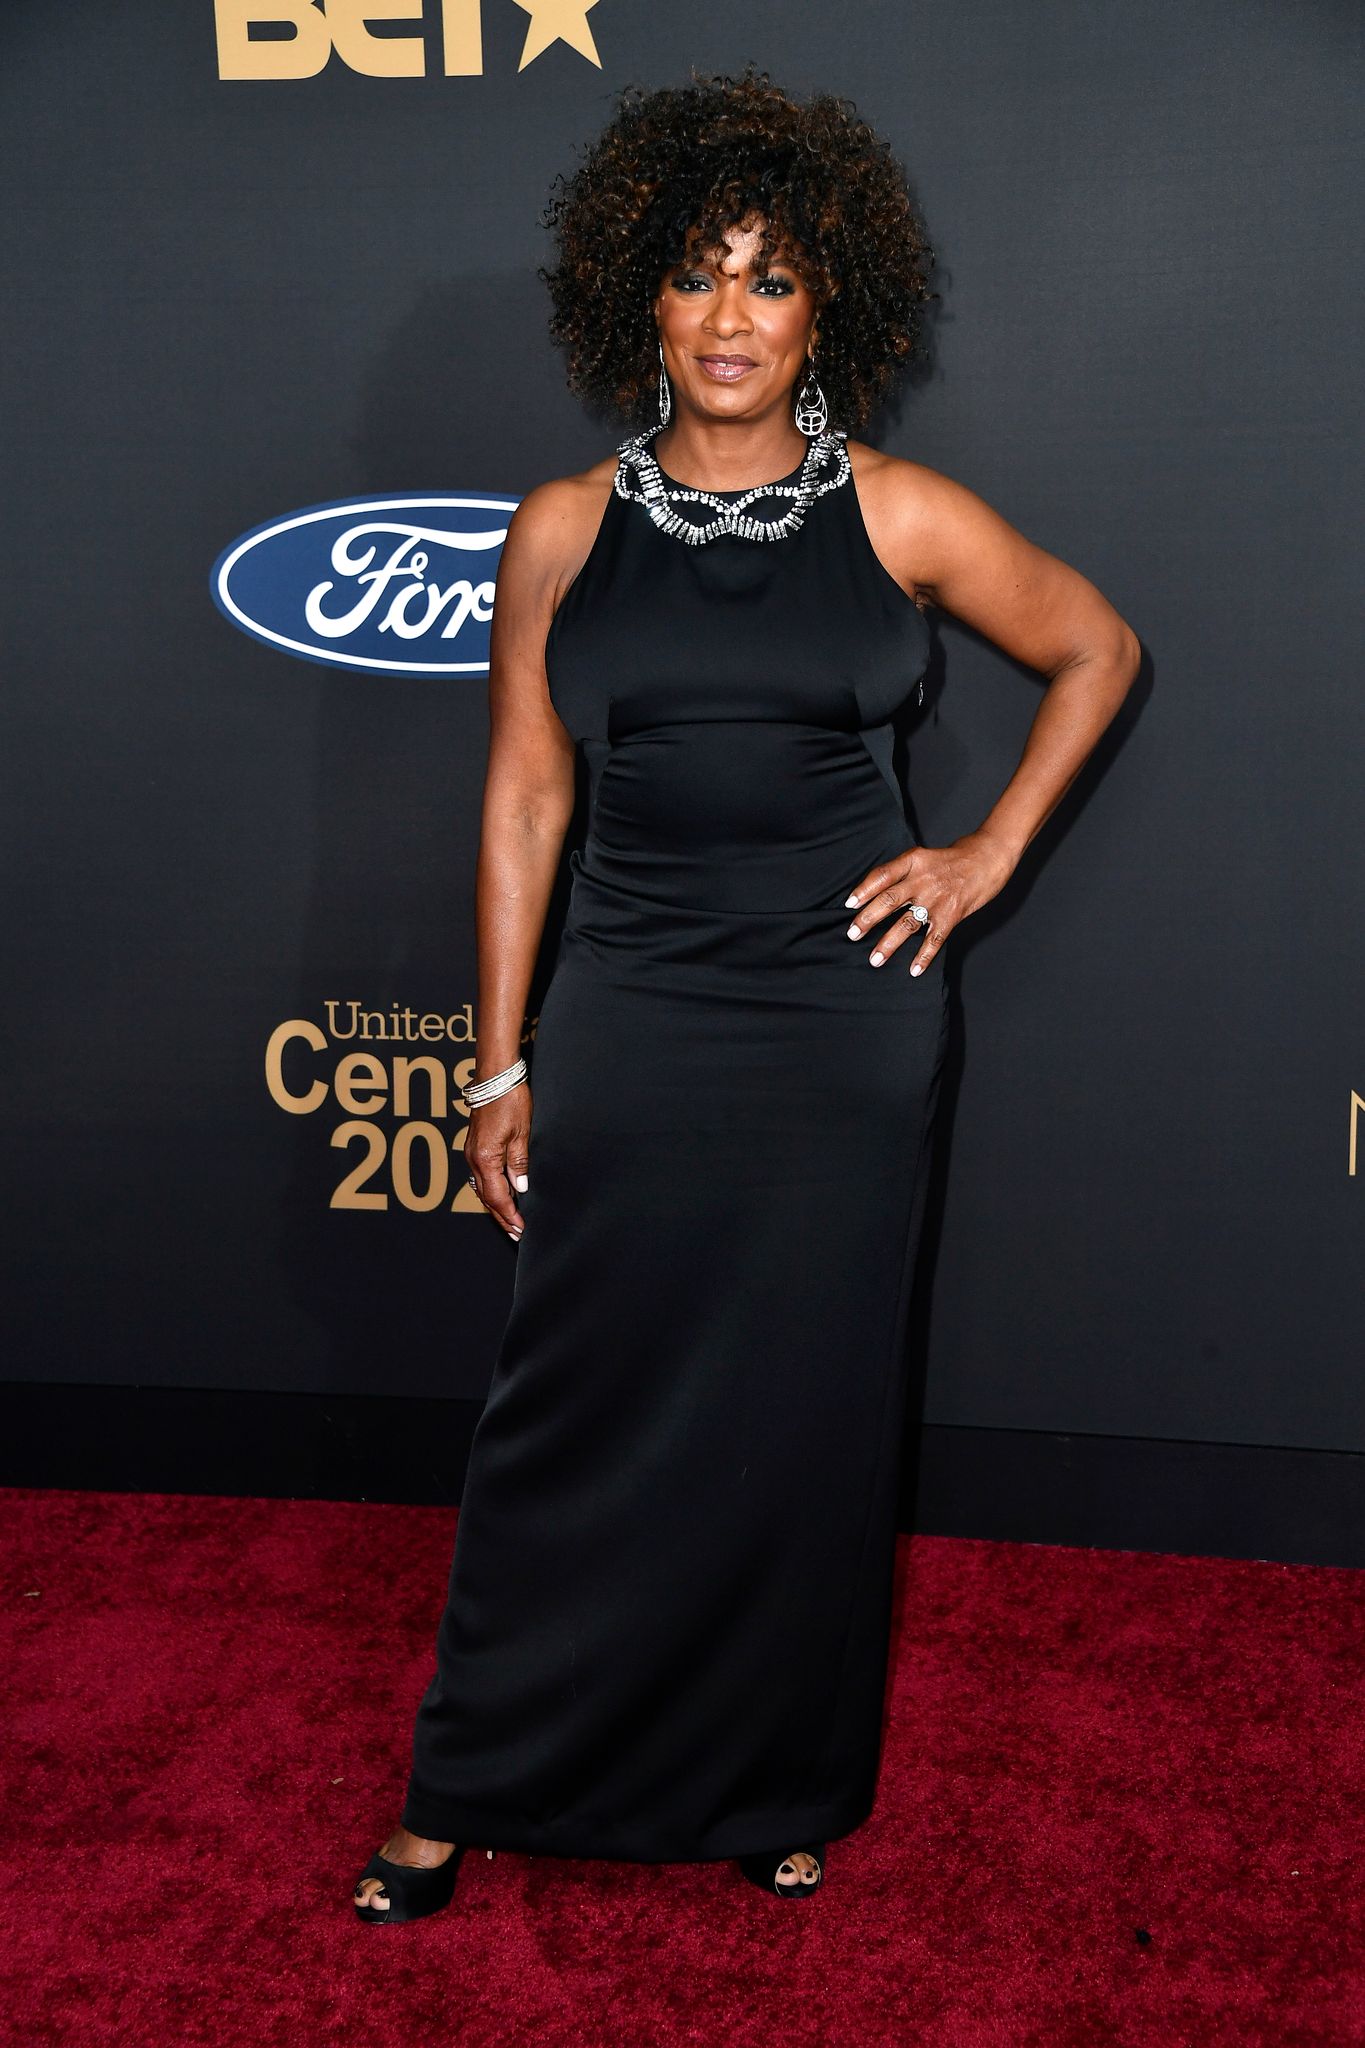 Vanessa Bell Calloway at the 51st NAACP Image Awards, Presented by BET, at Pasadena Civic Auditorium on February 22, 2020 in Pasadena, California | Photo: Getty Images